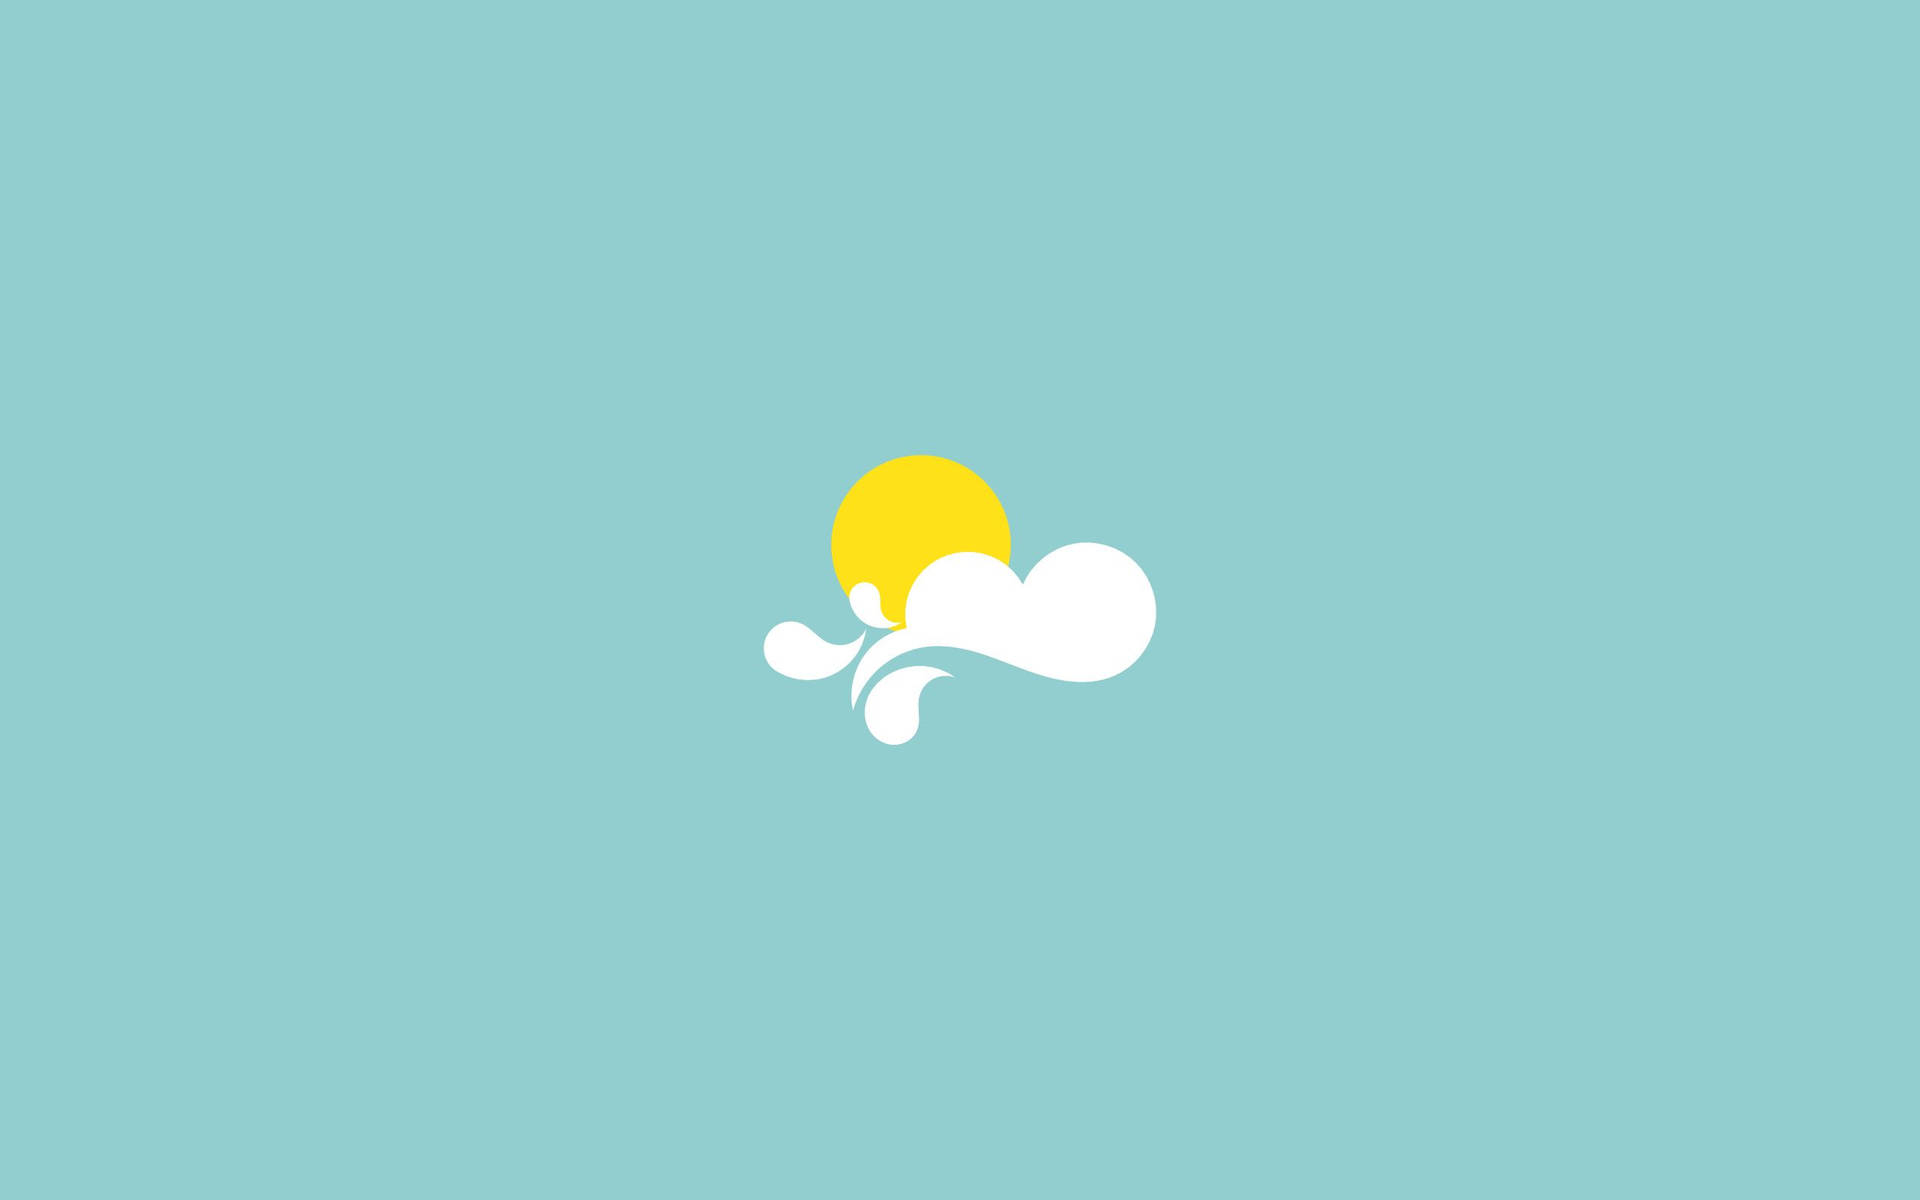 Partly Cloudy Simple Aesthetic Background